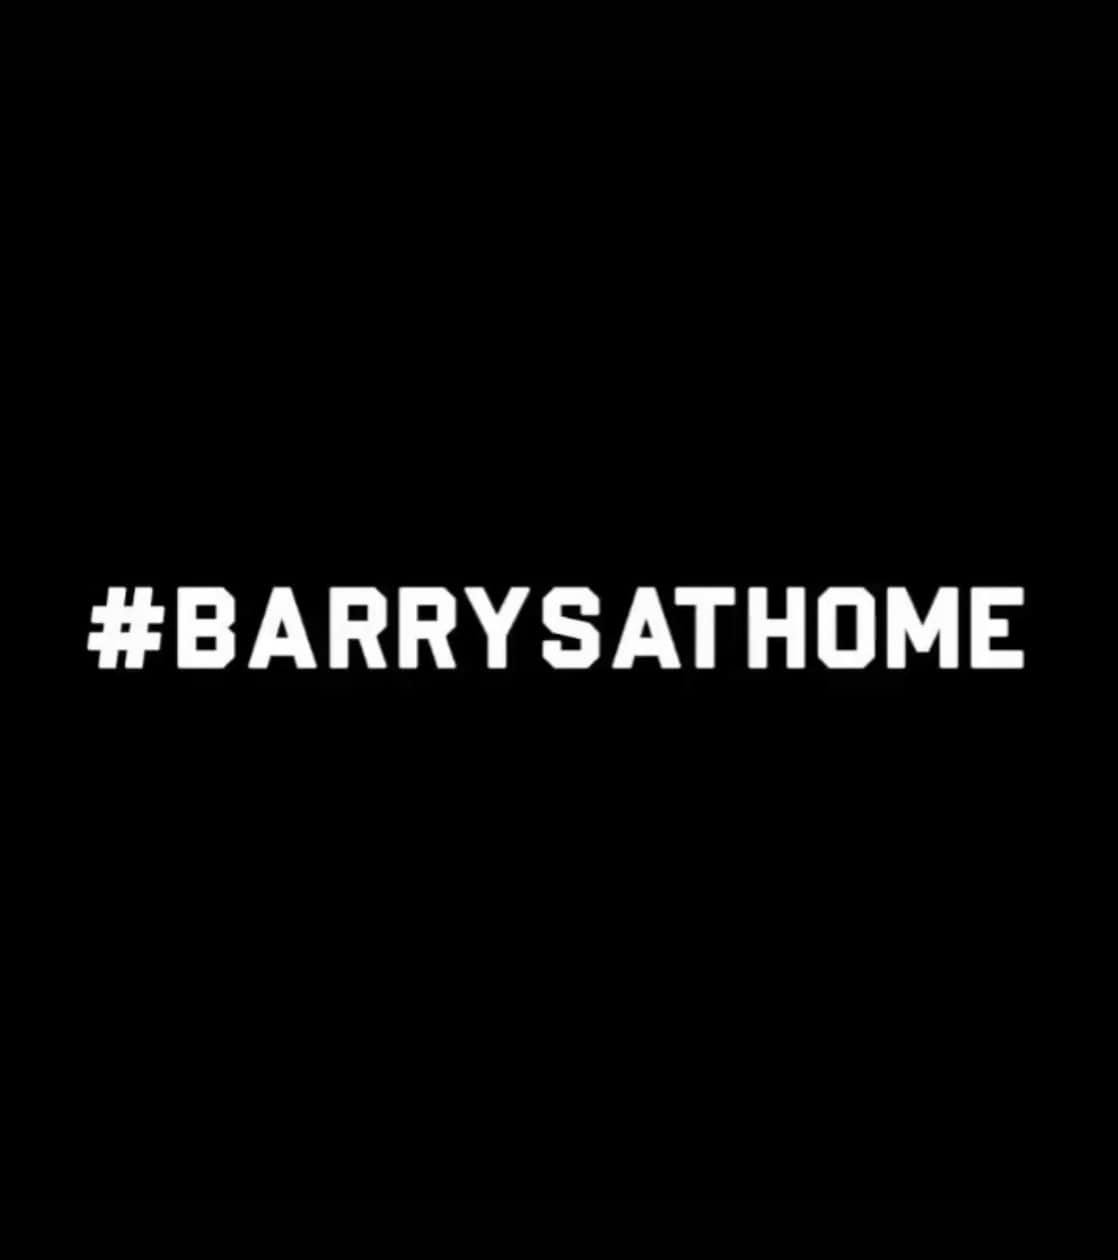 Barry's at home